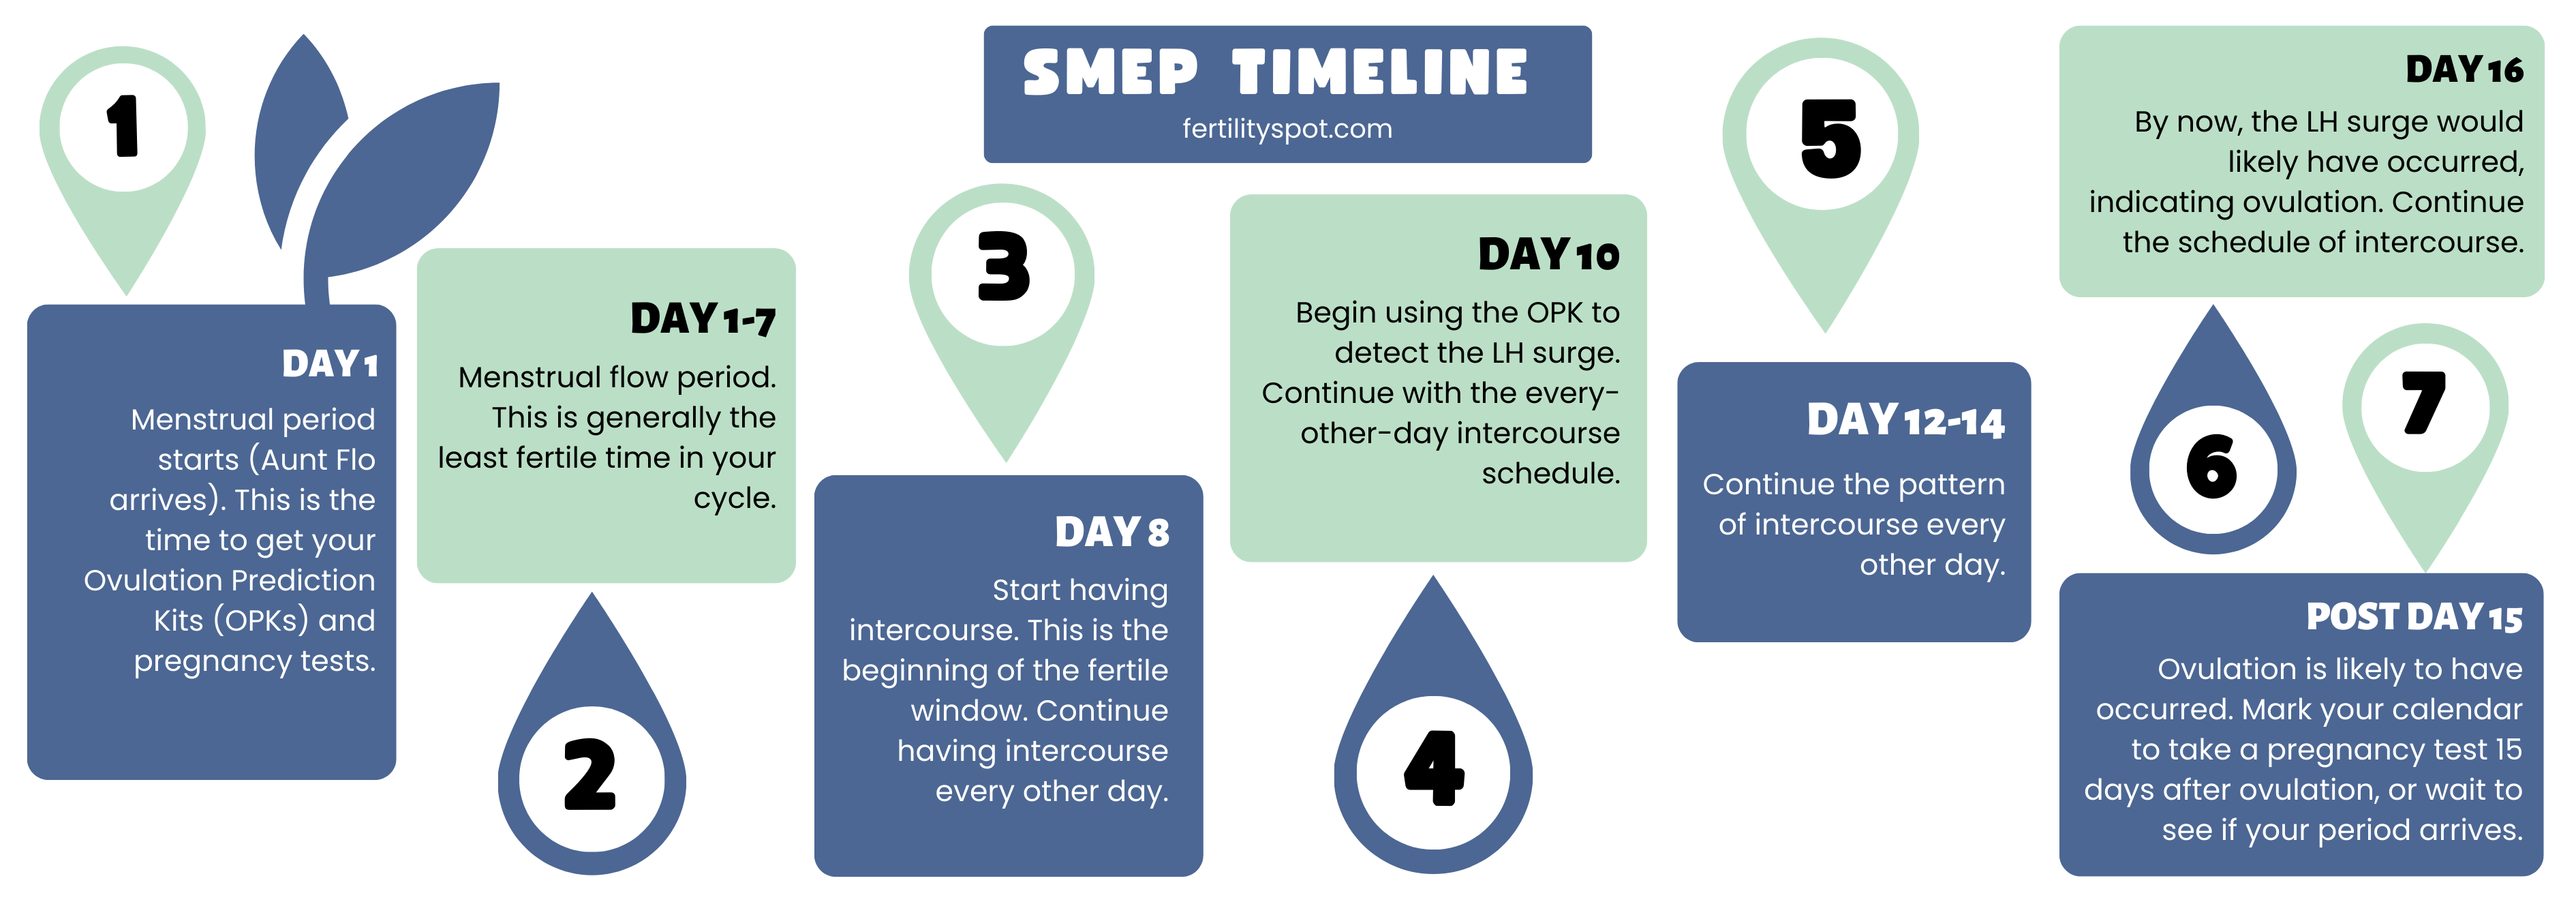 Fertility Spot - What Is The Sperm Meets Egg Plan Or SMEP And How Does It Work? Timeline Infographic